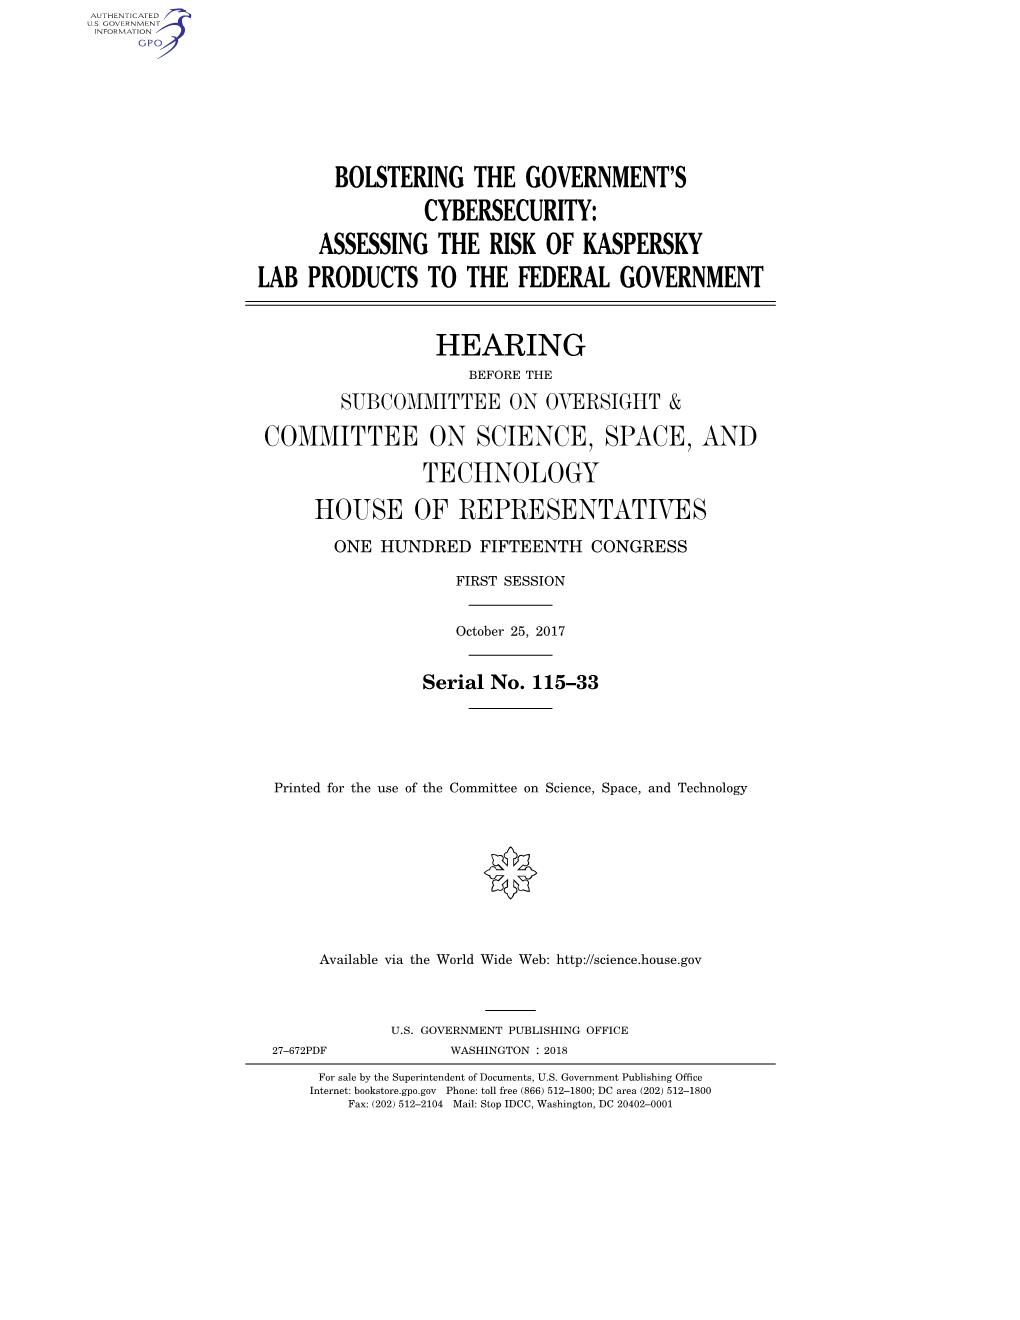 Bolstering the Government's Cybersecurity: Assessing the Risk of Kaspersky Lab Products to the Federal Government Hearing Comm